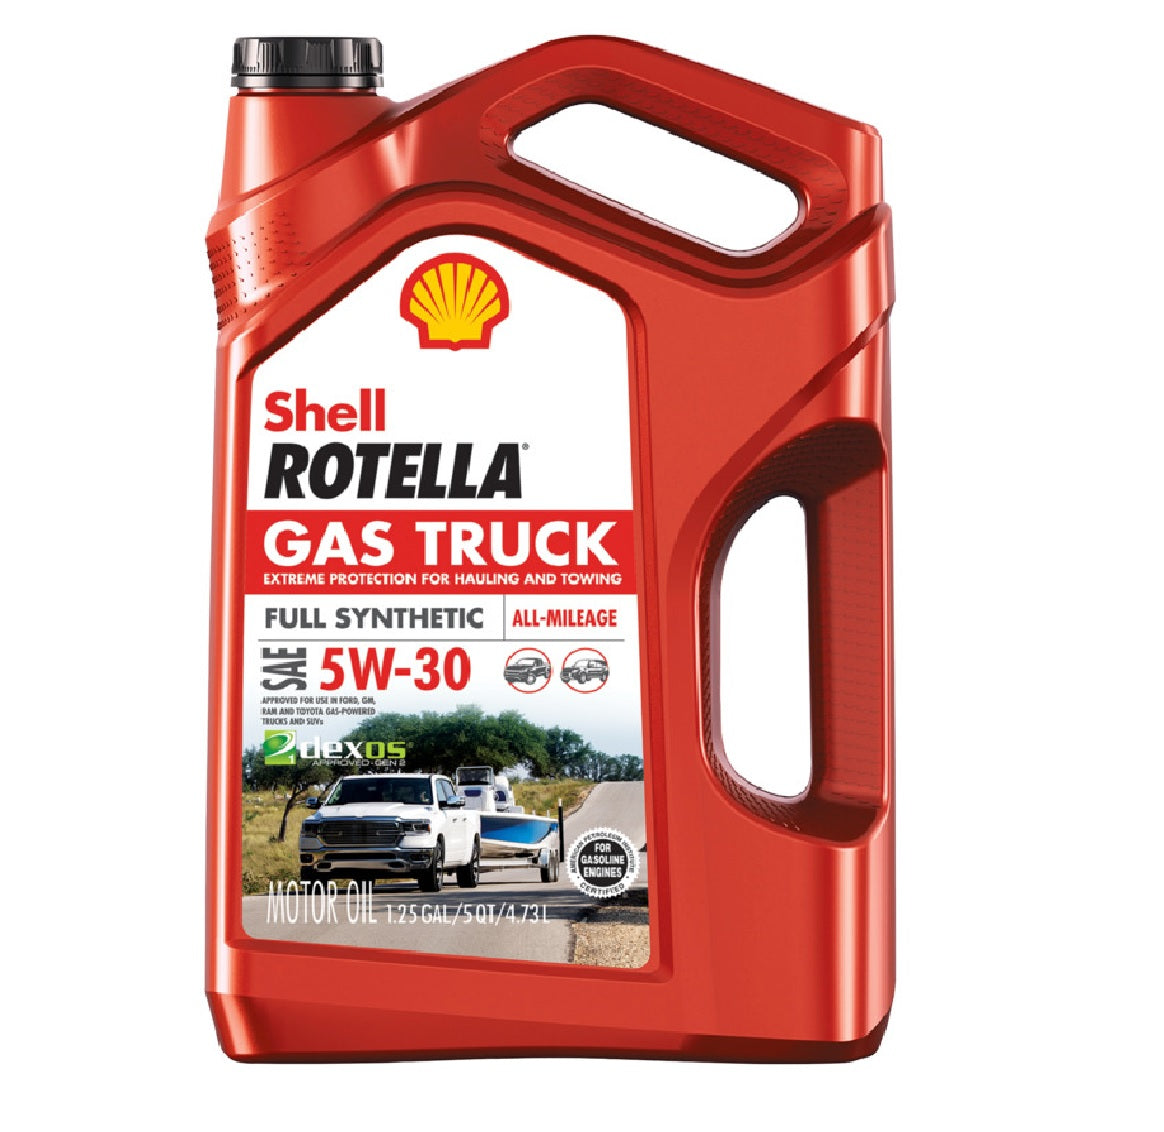 Shell Rotella 550050319 Gas Truck Full Synthetic Motor Oil